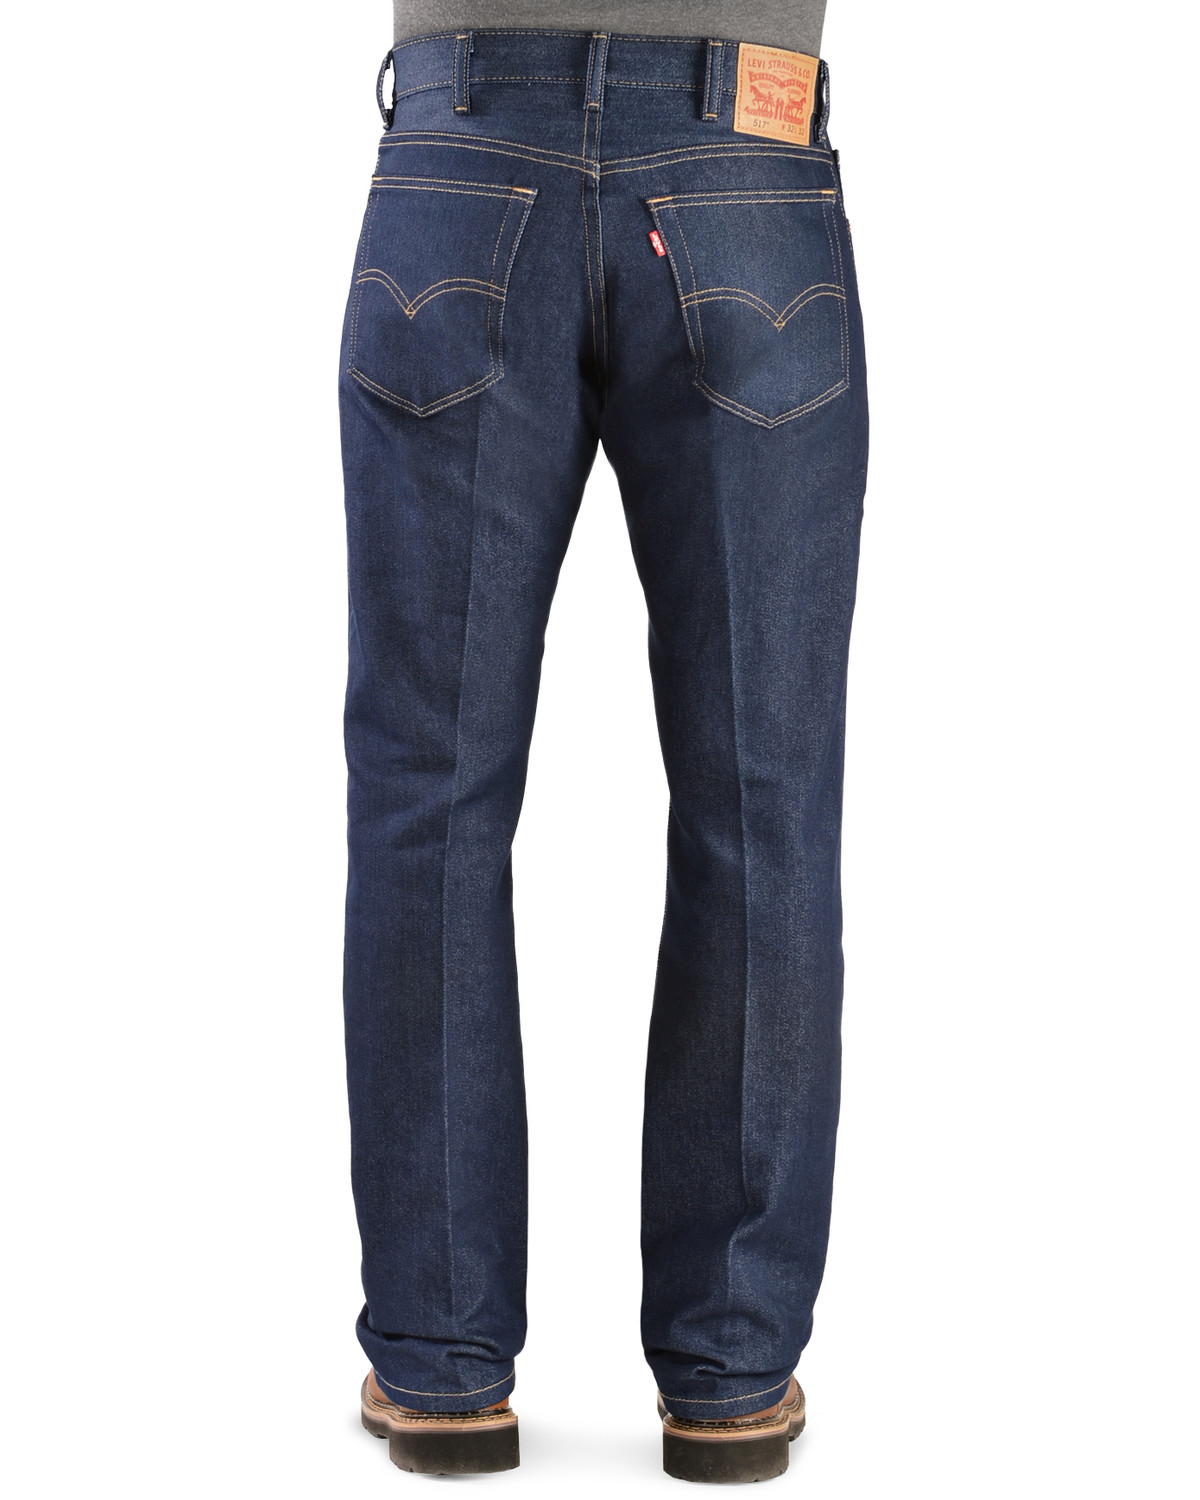 Levi's 517 Jeans - Boot Cut Stretch - Country Outfitter